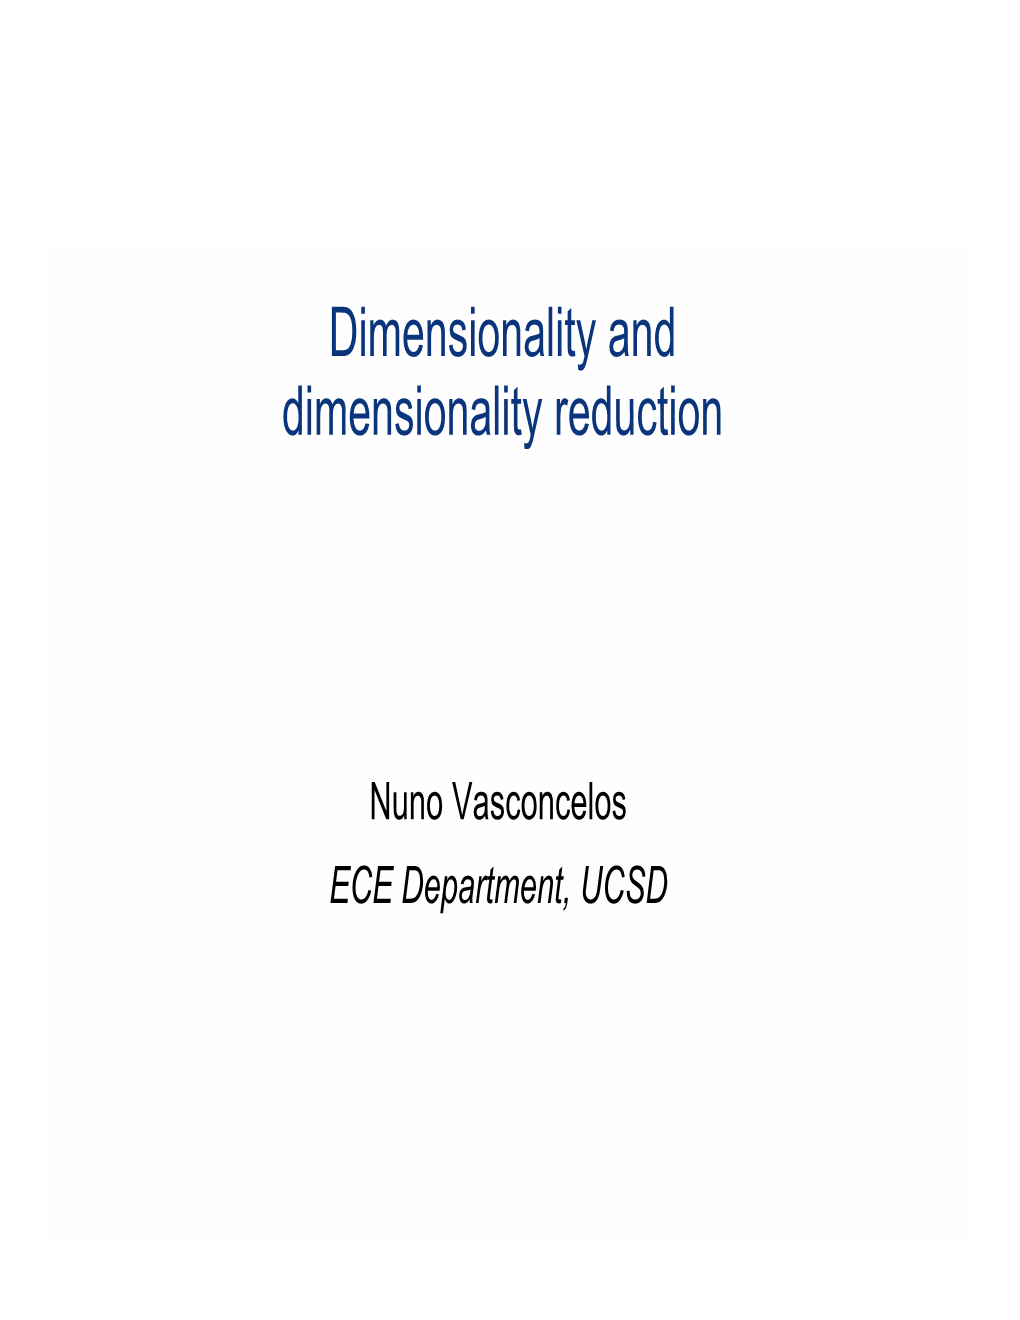 Dimensionality and Dimensionality Reduction